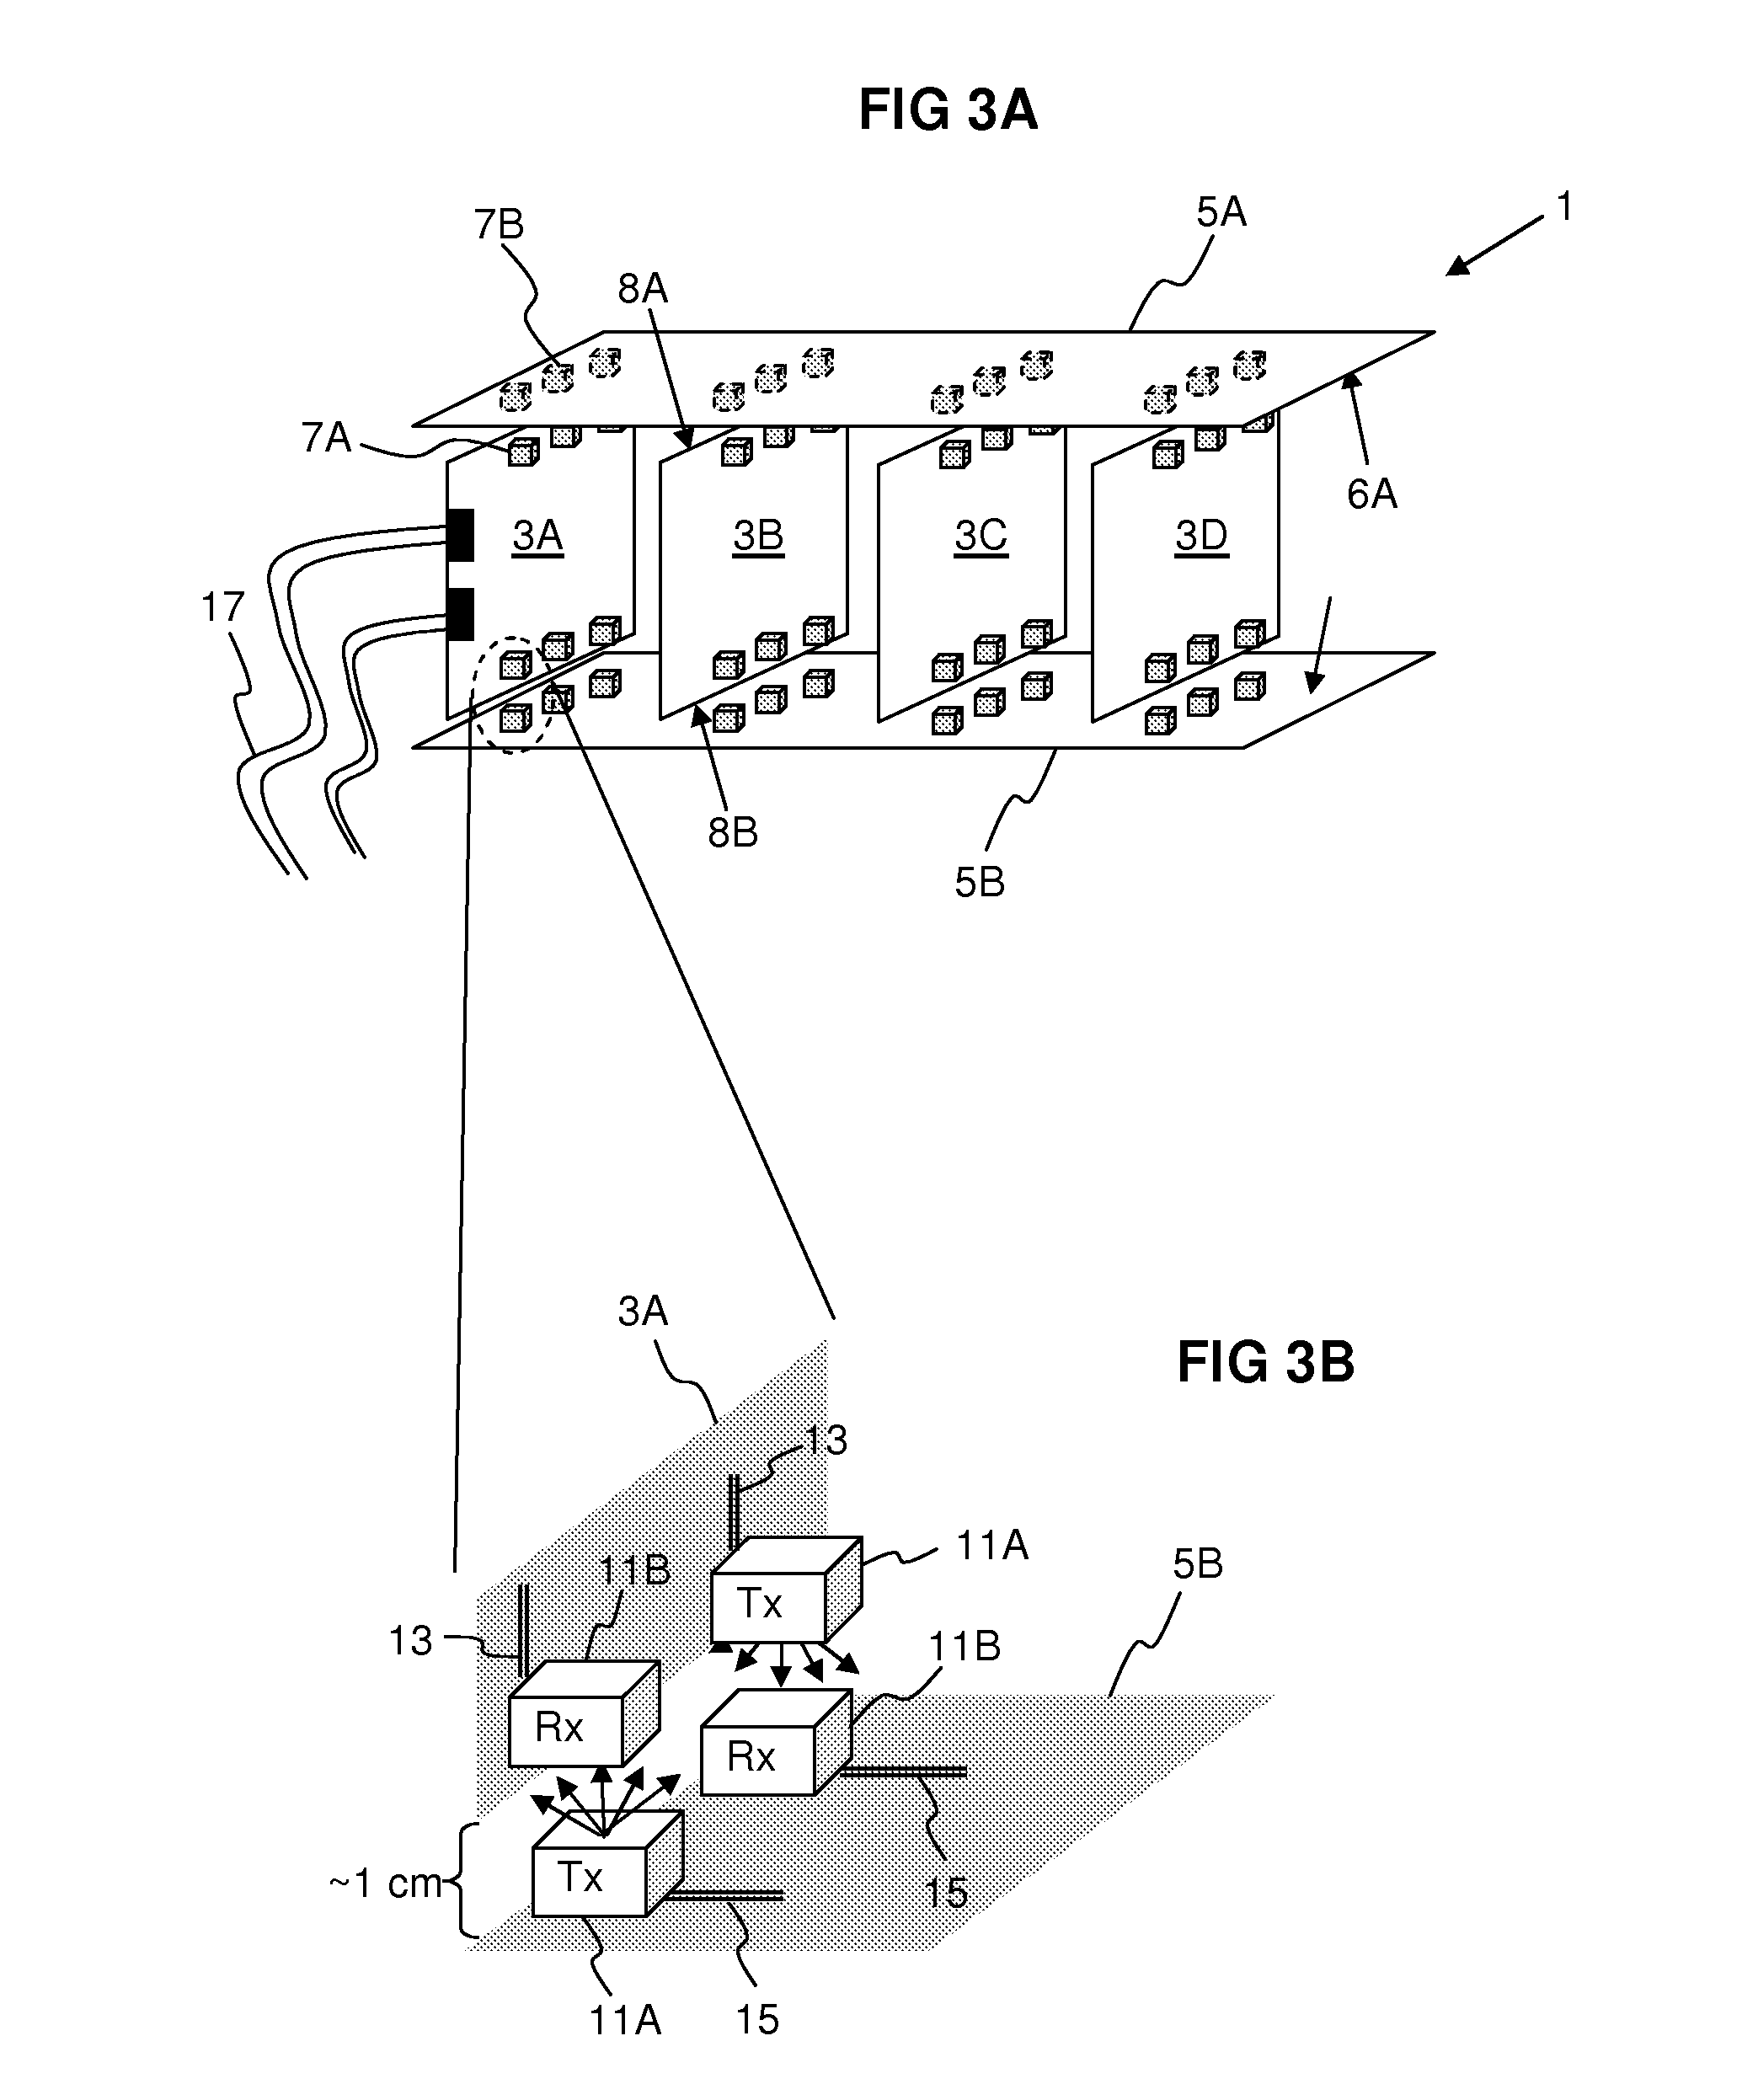 System card architecture for switching device